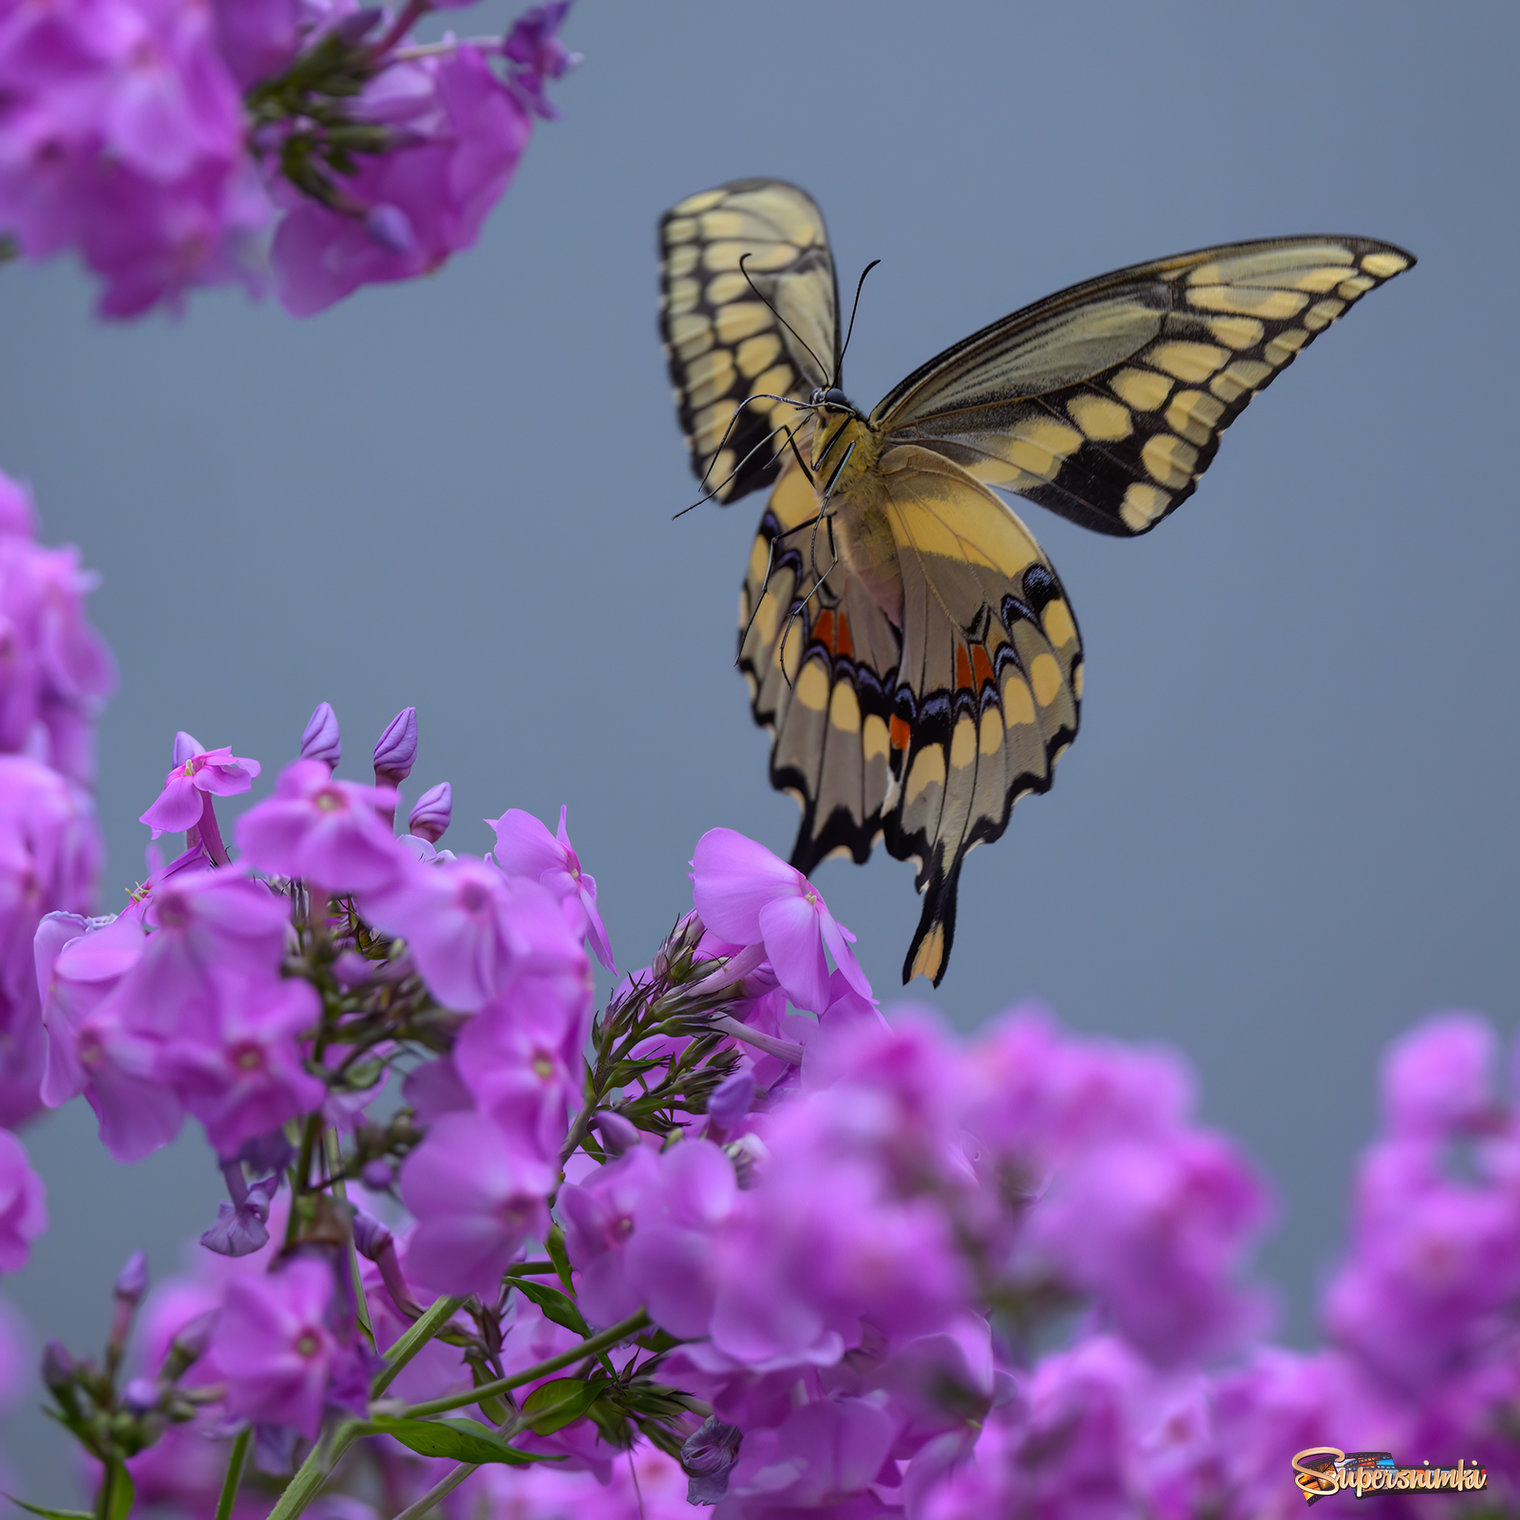  Giant Swallowtail butterfly